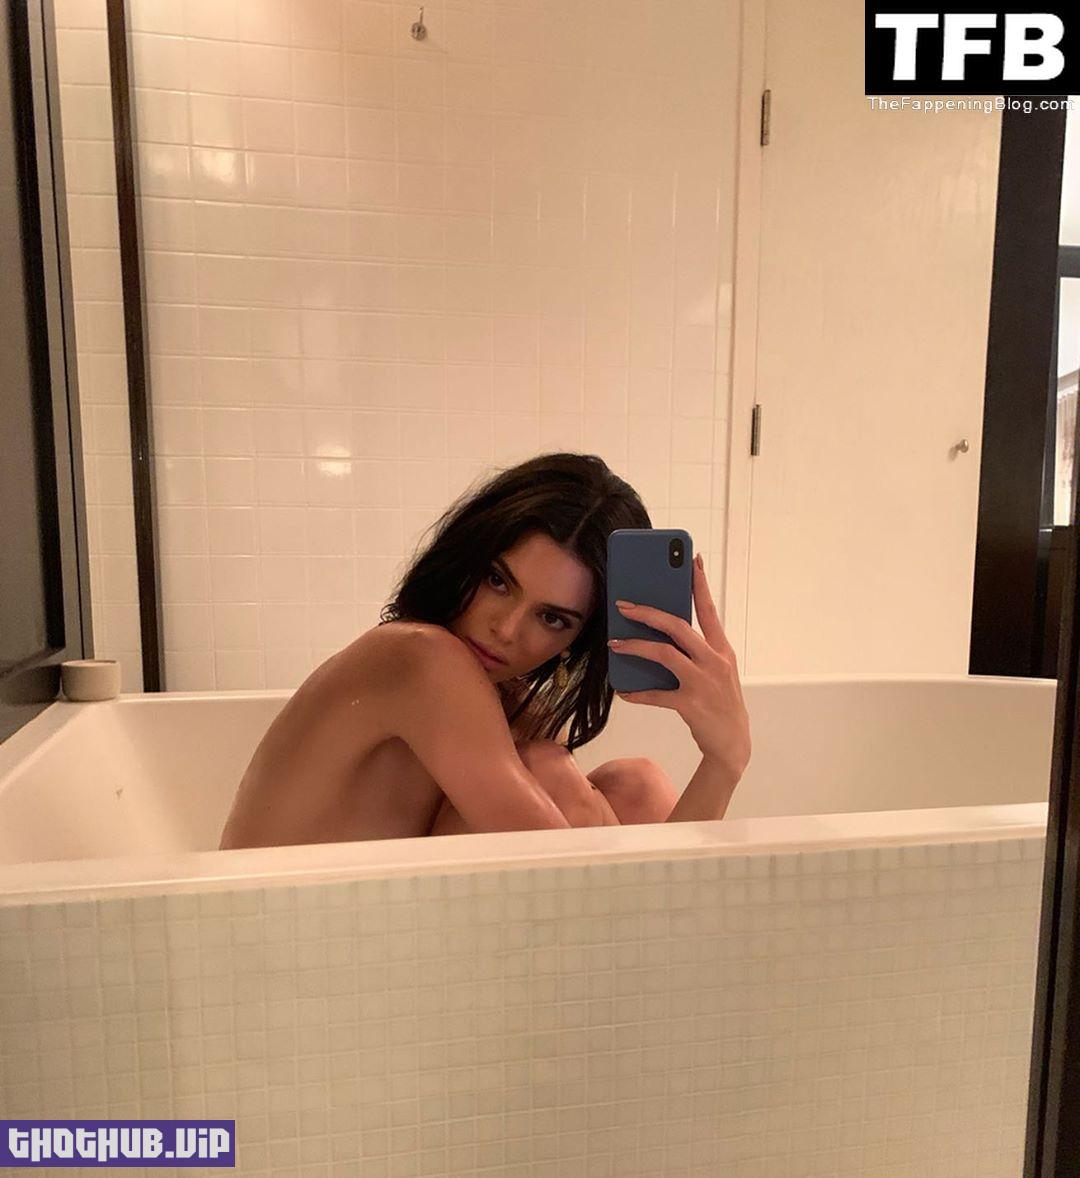 kendall jenner private photos 29042 thefappeningblog.com